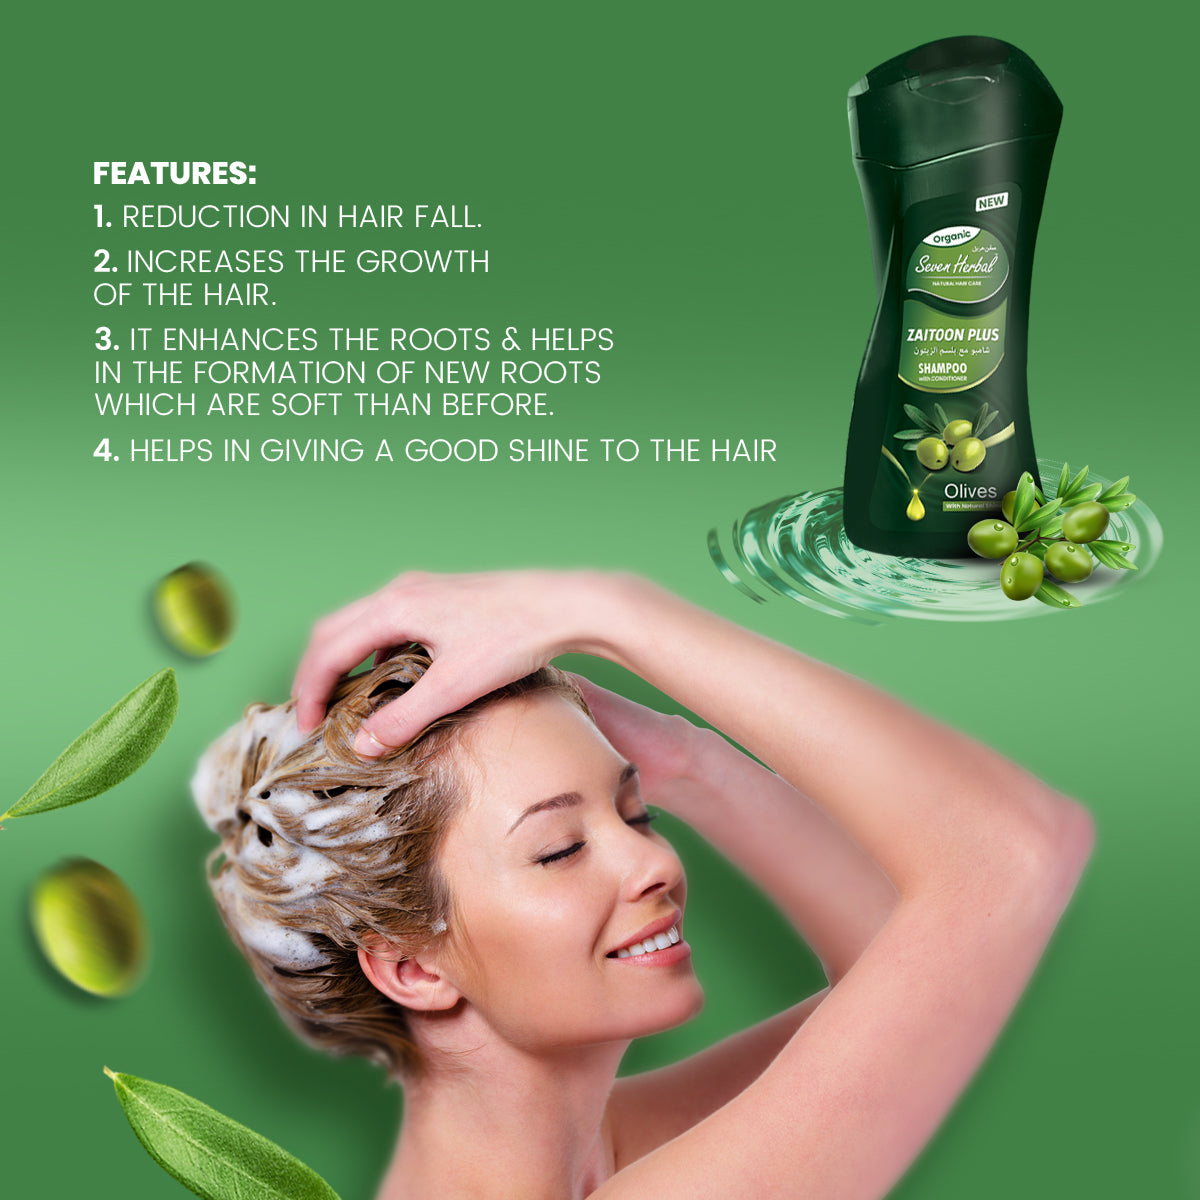 Seven Herbal Zaitoon Plus Shampoo with Conditioner